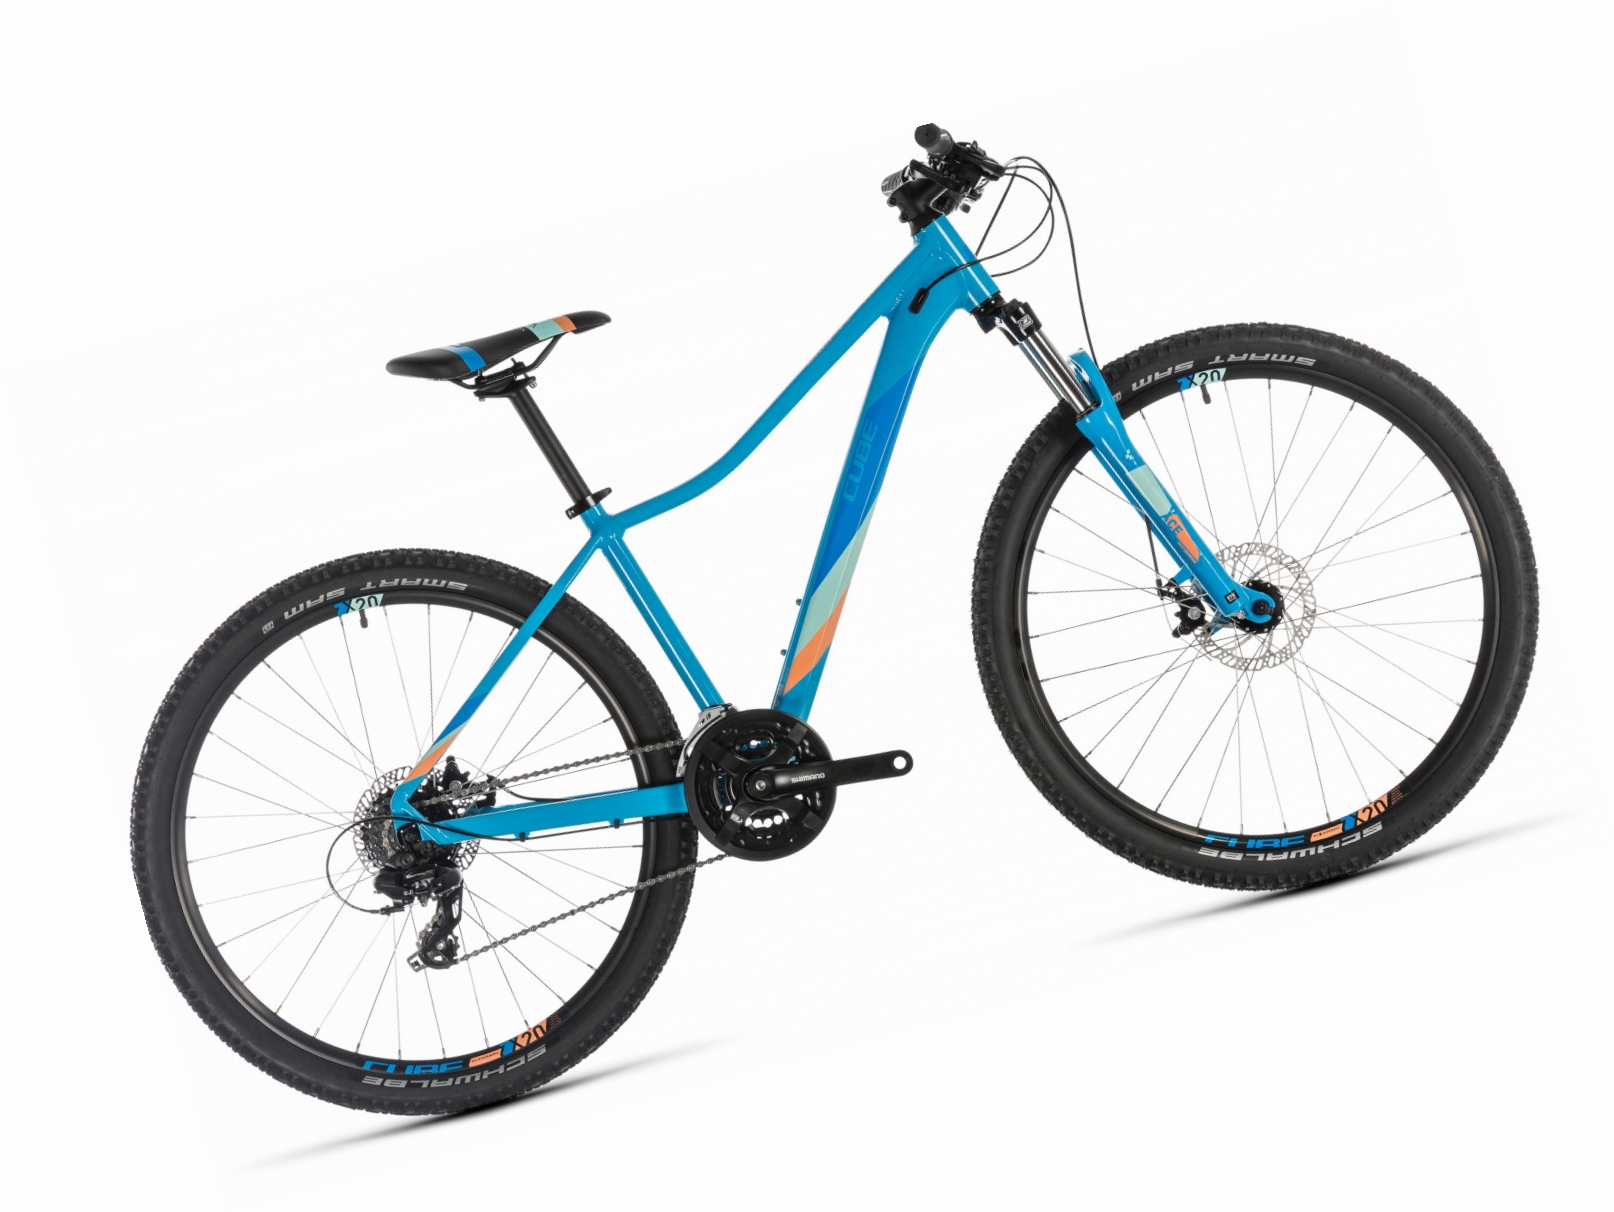 Cube ws. Cube access WS 27.5. Cube access xc300. Женский велосипед Cube access WS 27.5. Cube WS 2019.